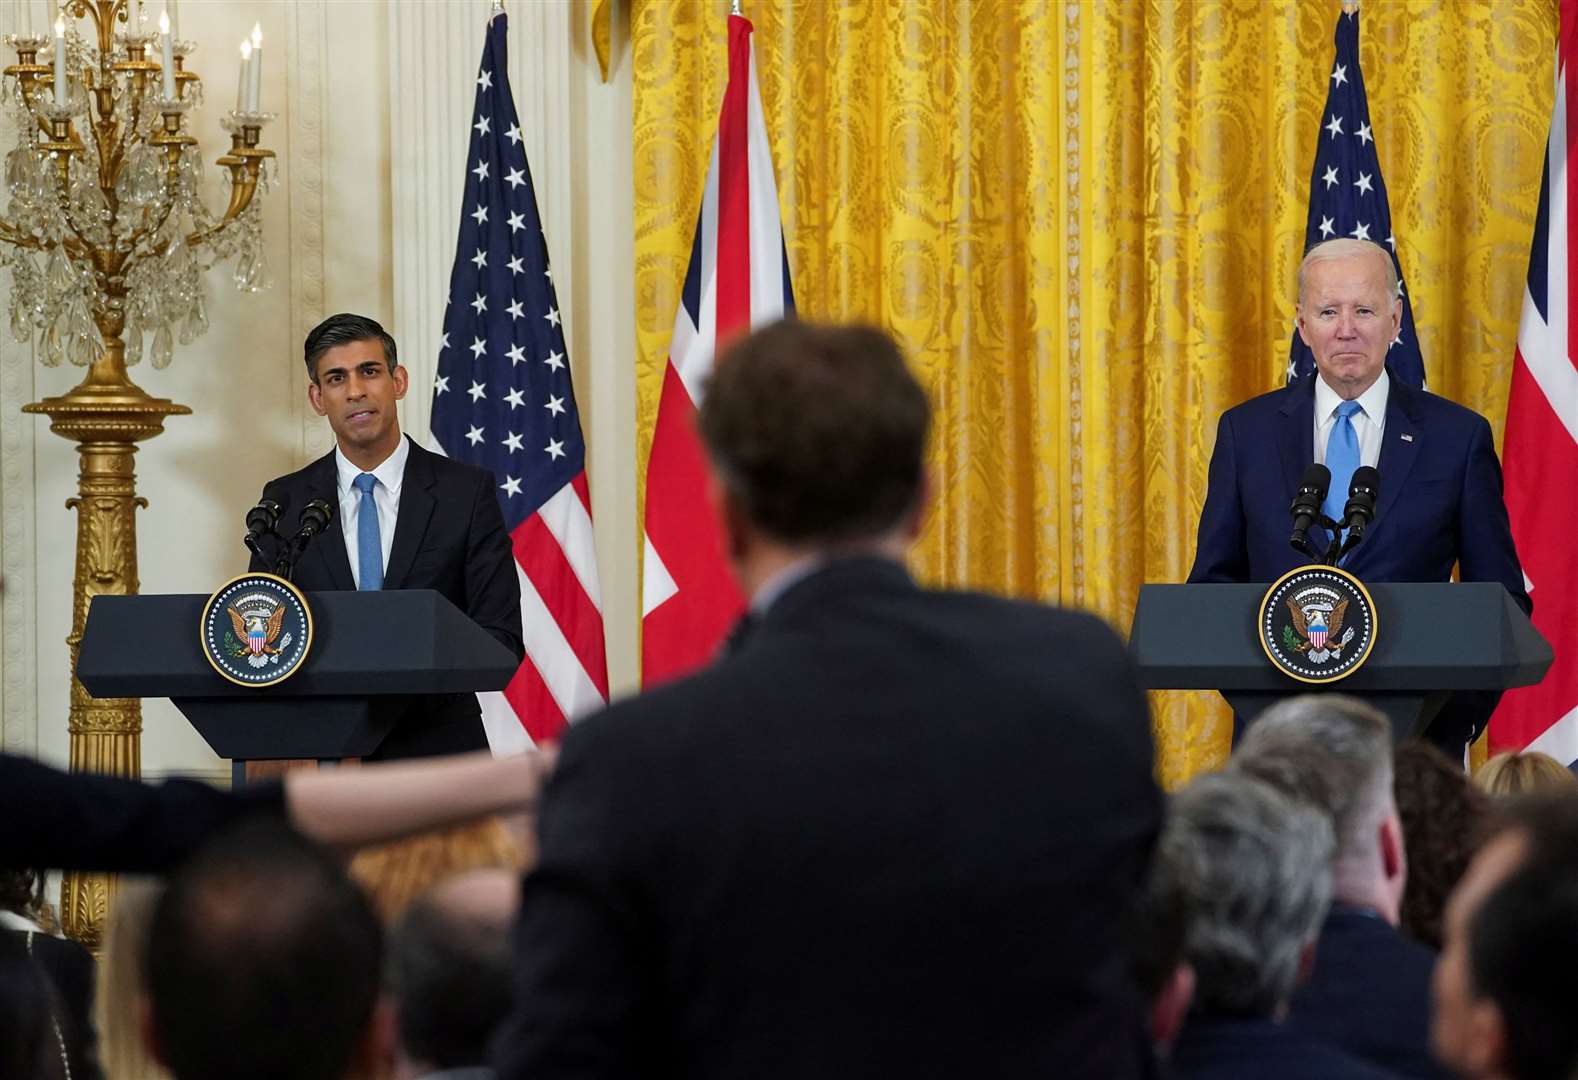 Prime Minister Rishi Sunak and US President Joe Biden take part in a joint press conference in the East Room at the White House (Kevin Lamarque/PA)